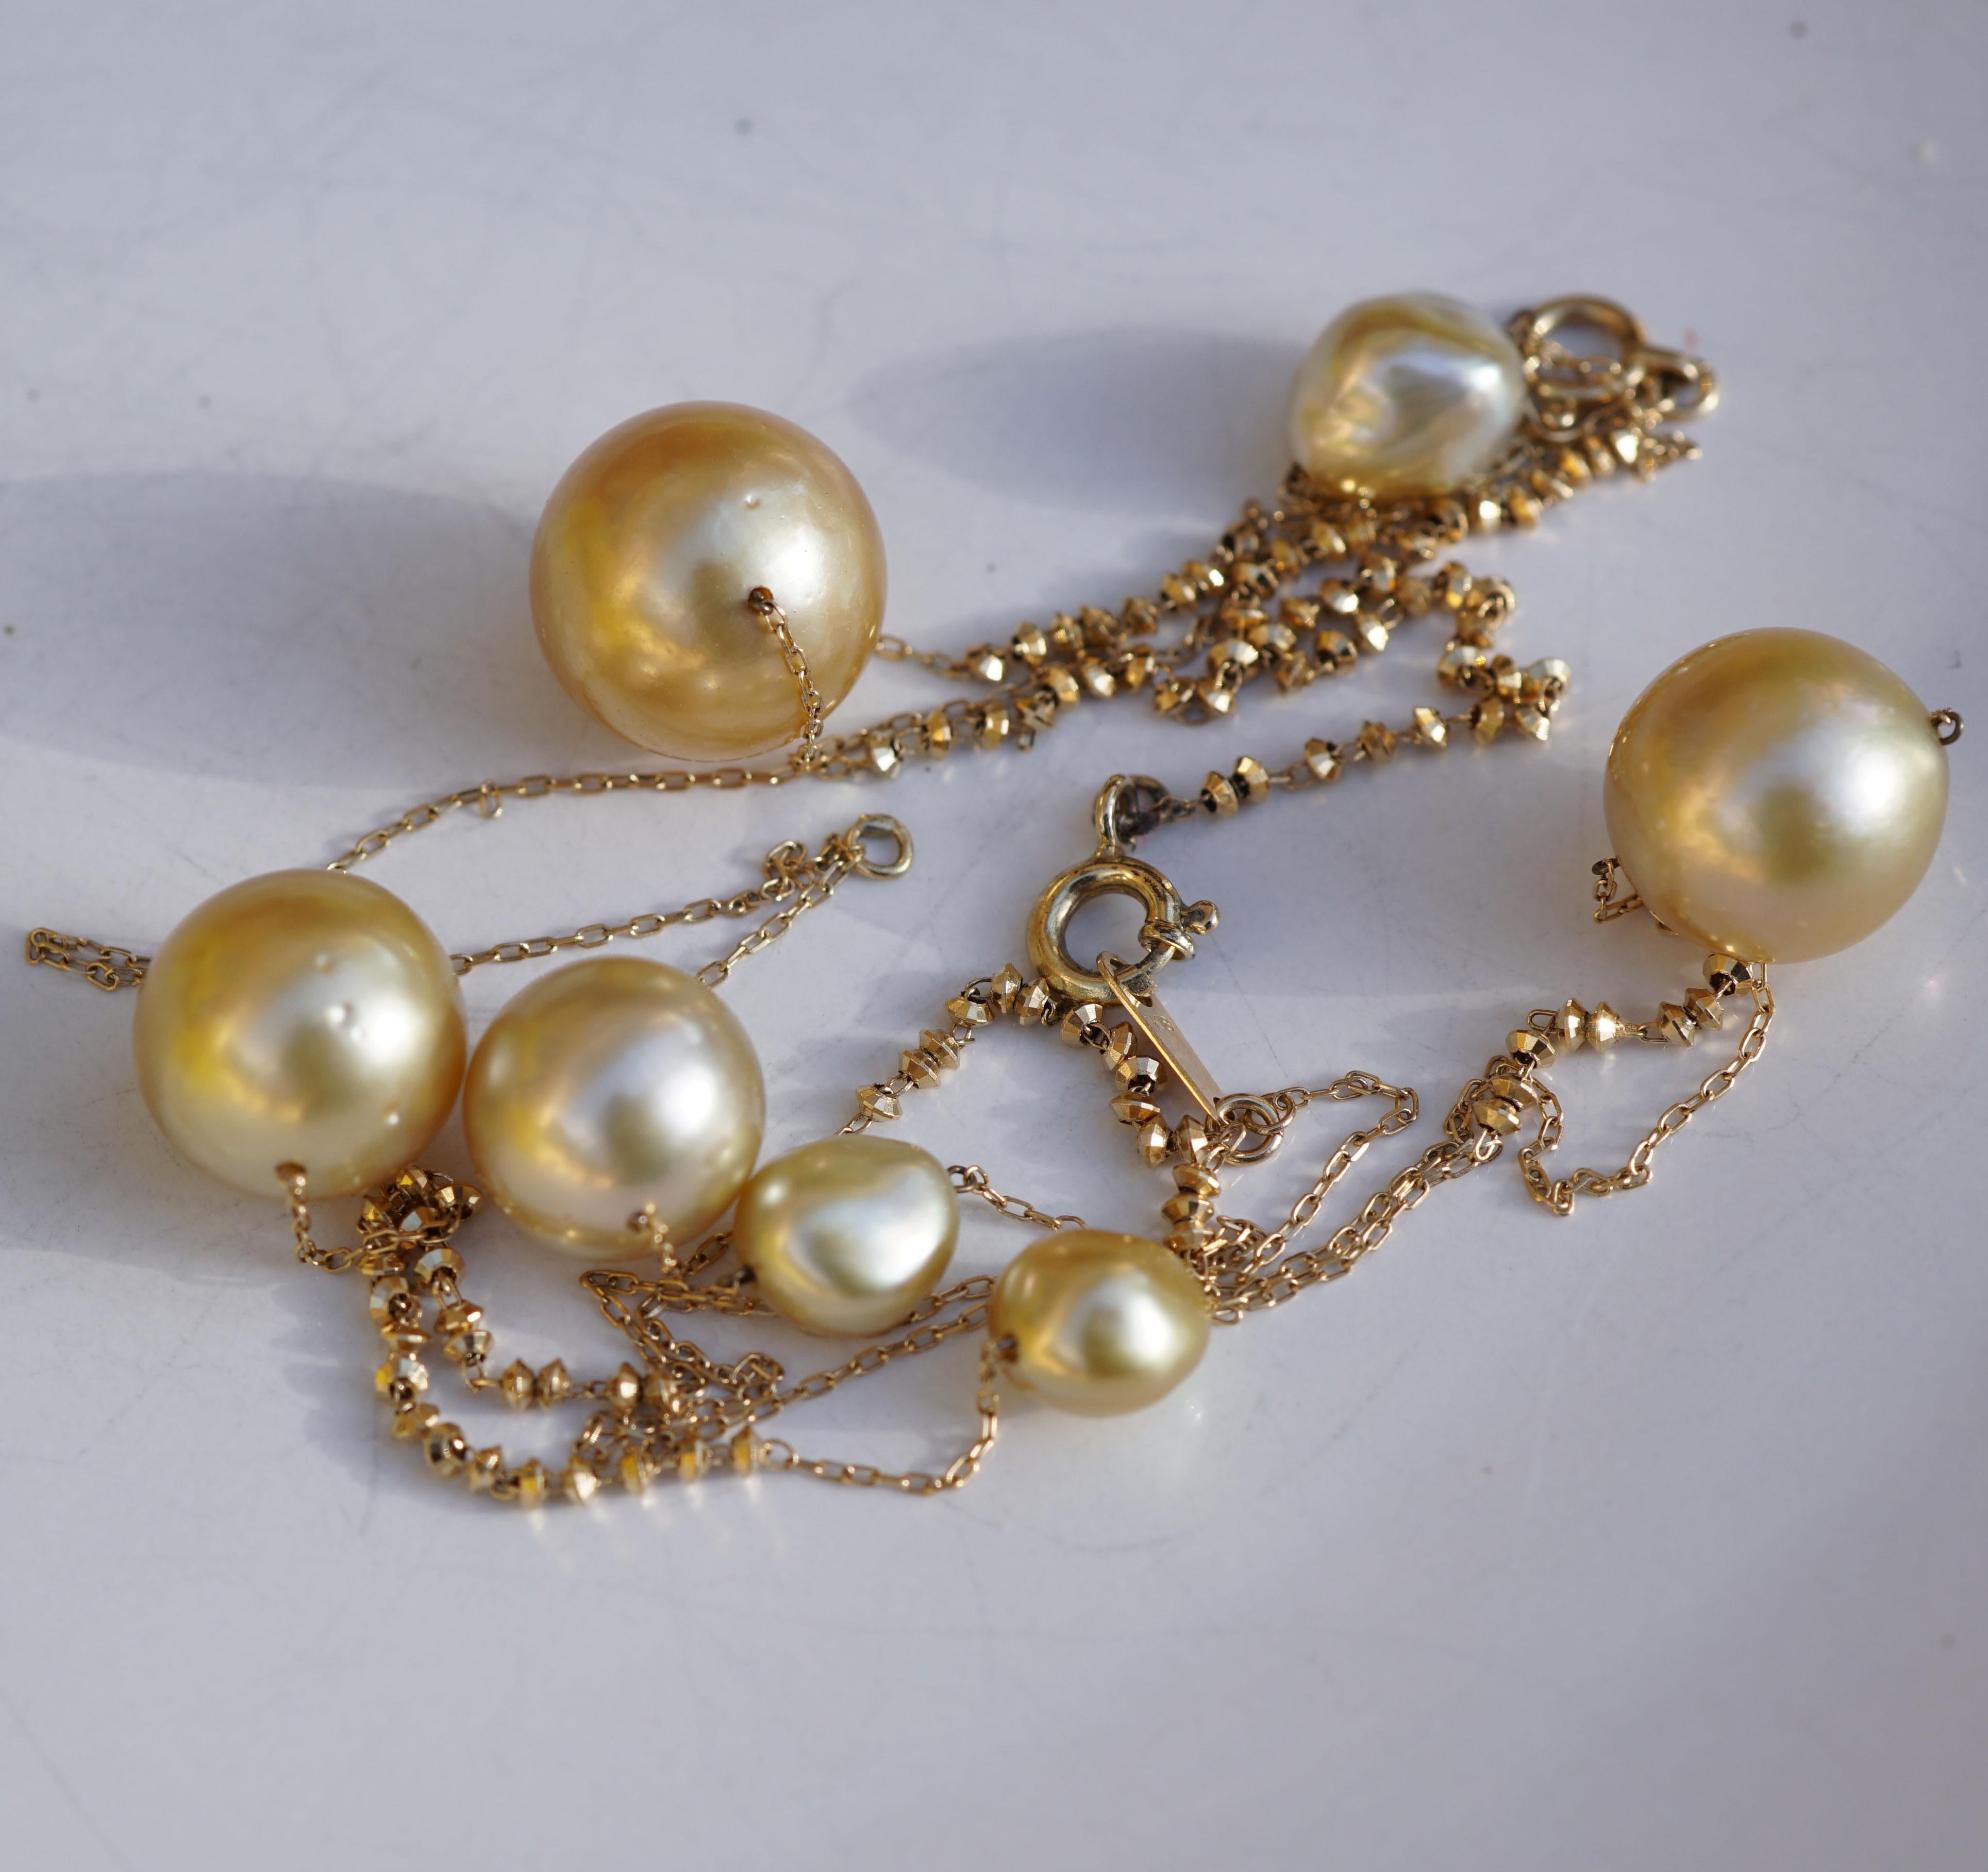 necklace and bracelet together made a long chain with 75 cm, weight total 12 grams, 7 very fine southsea and saltwater keshi pearls (6,3-12,45 mm), great natural goldcolor, AAA+, handmade chain in Japan, 750er Yellowgold, decorative round elements,